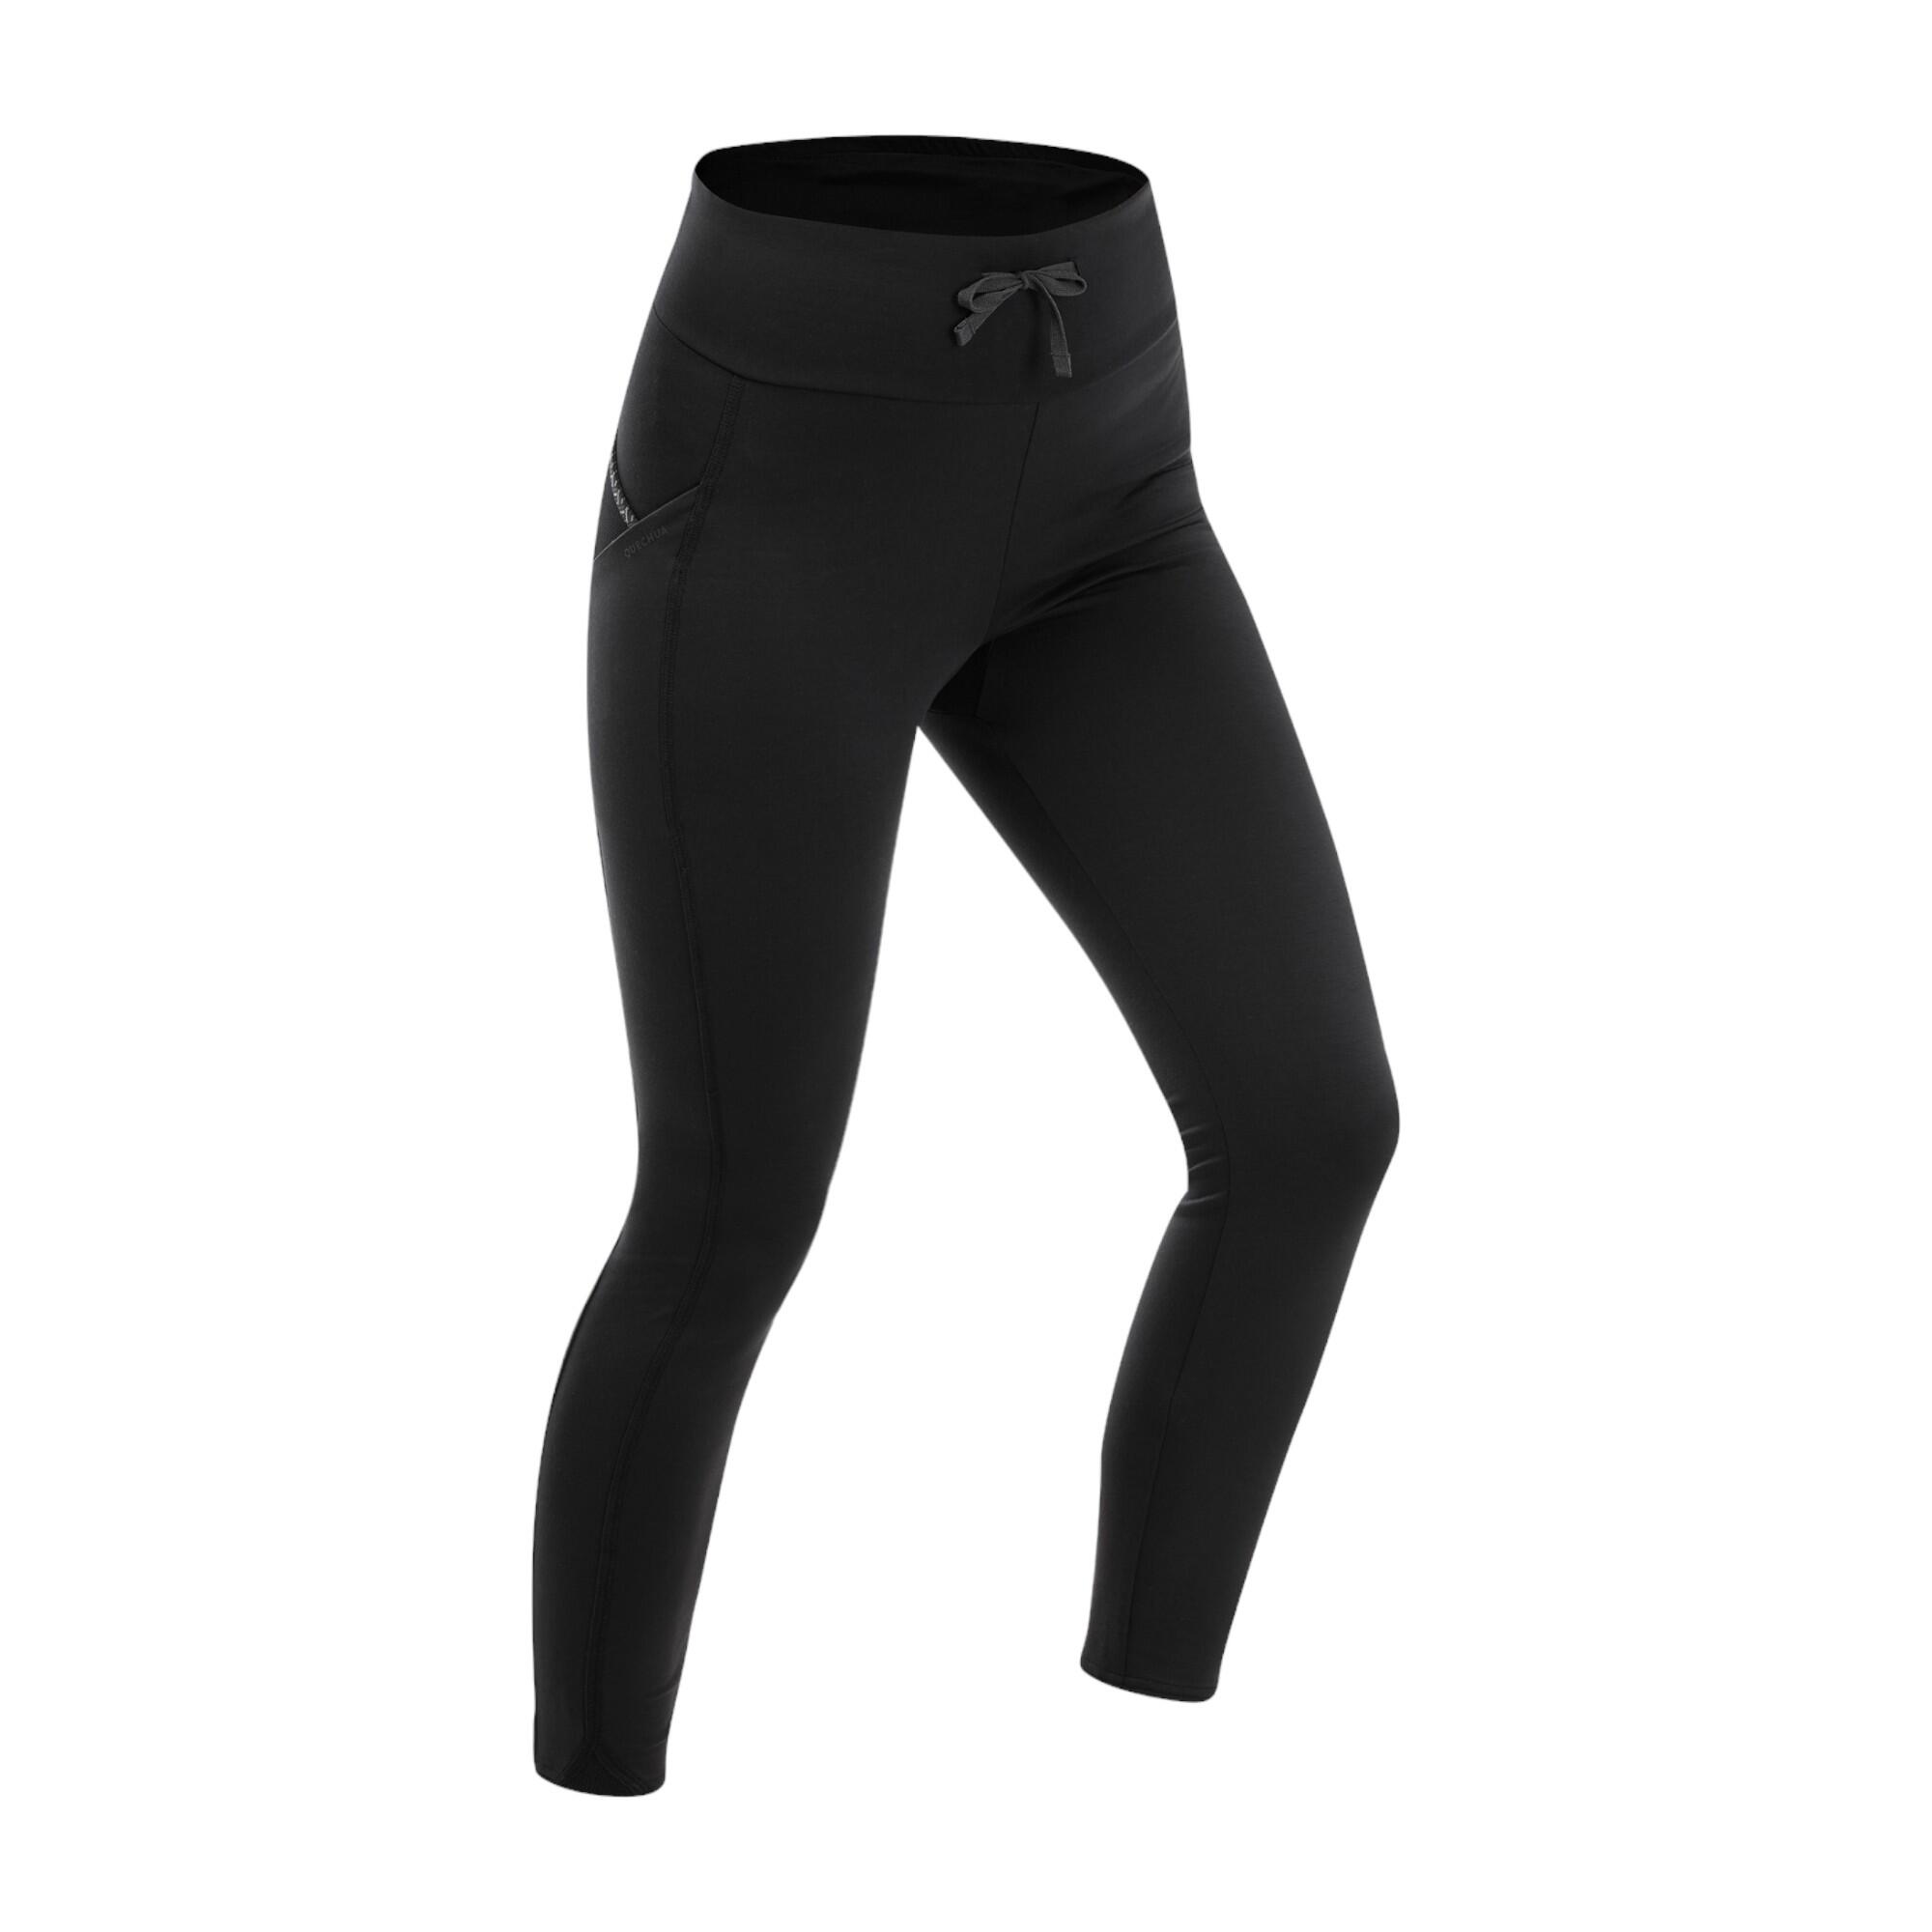 Hiking Base Layer For Women